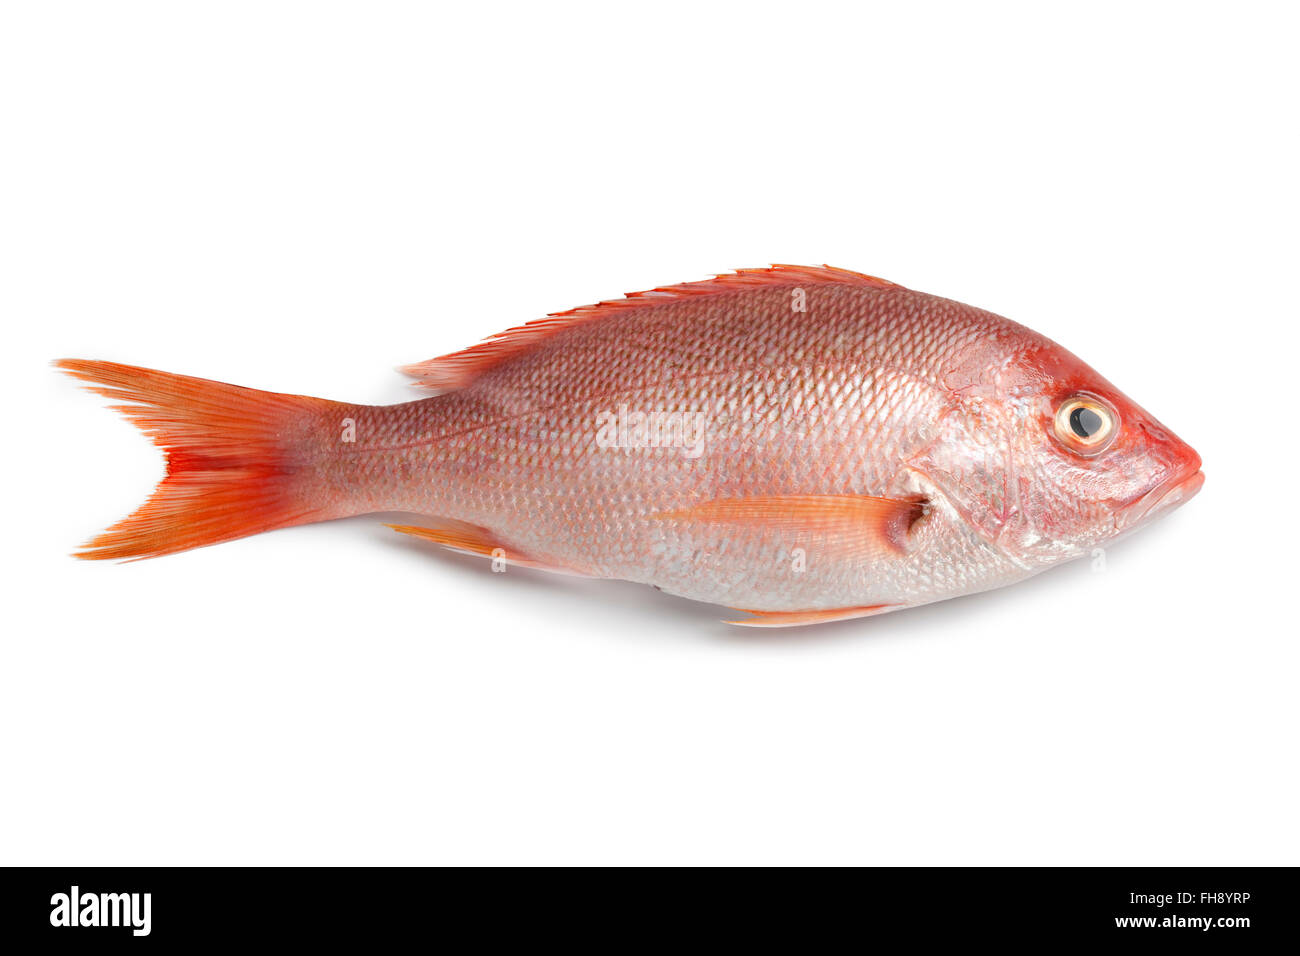 Whole fresh raw red snapper isolated on white background Stock Photo